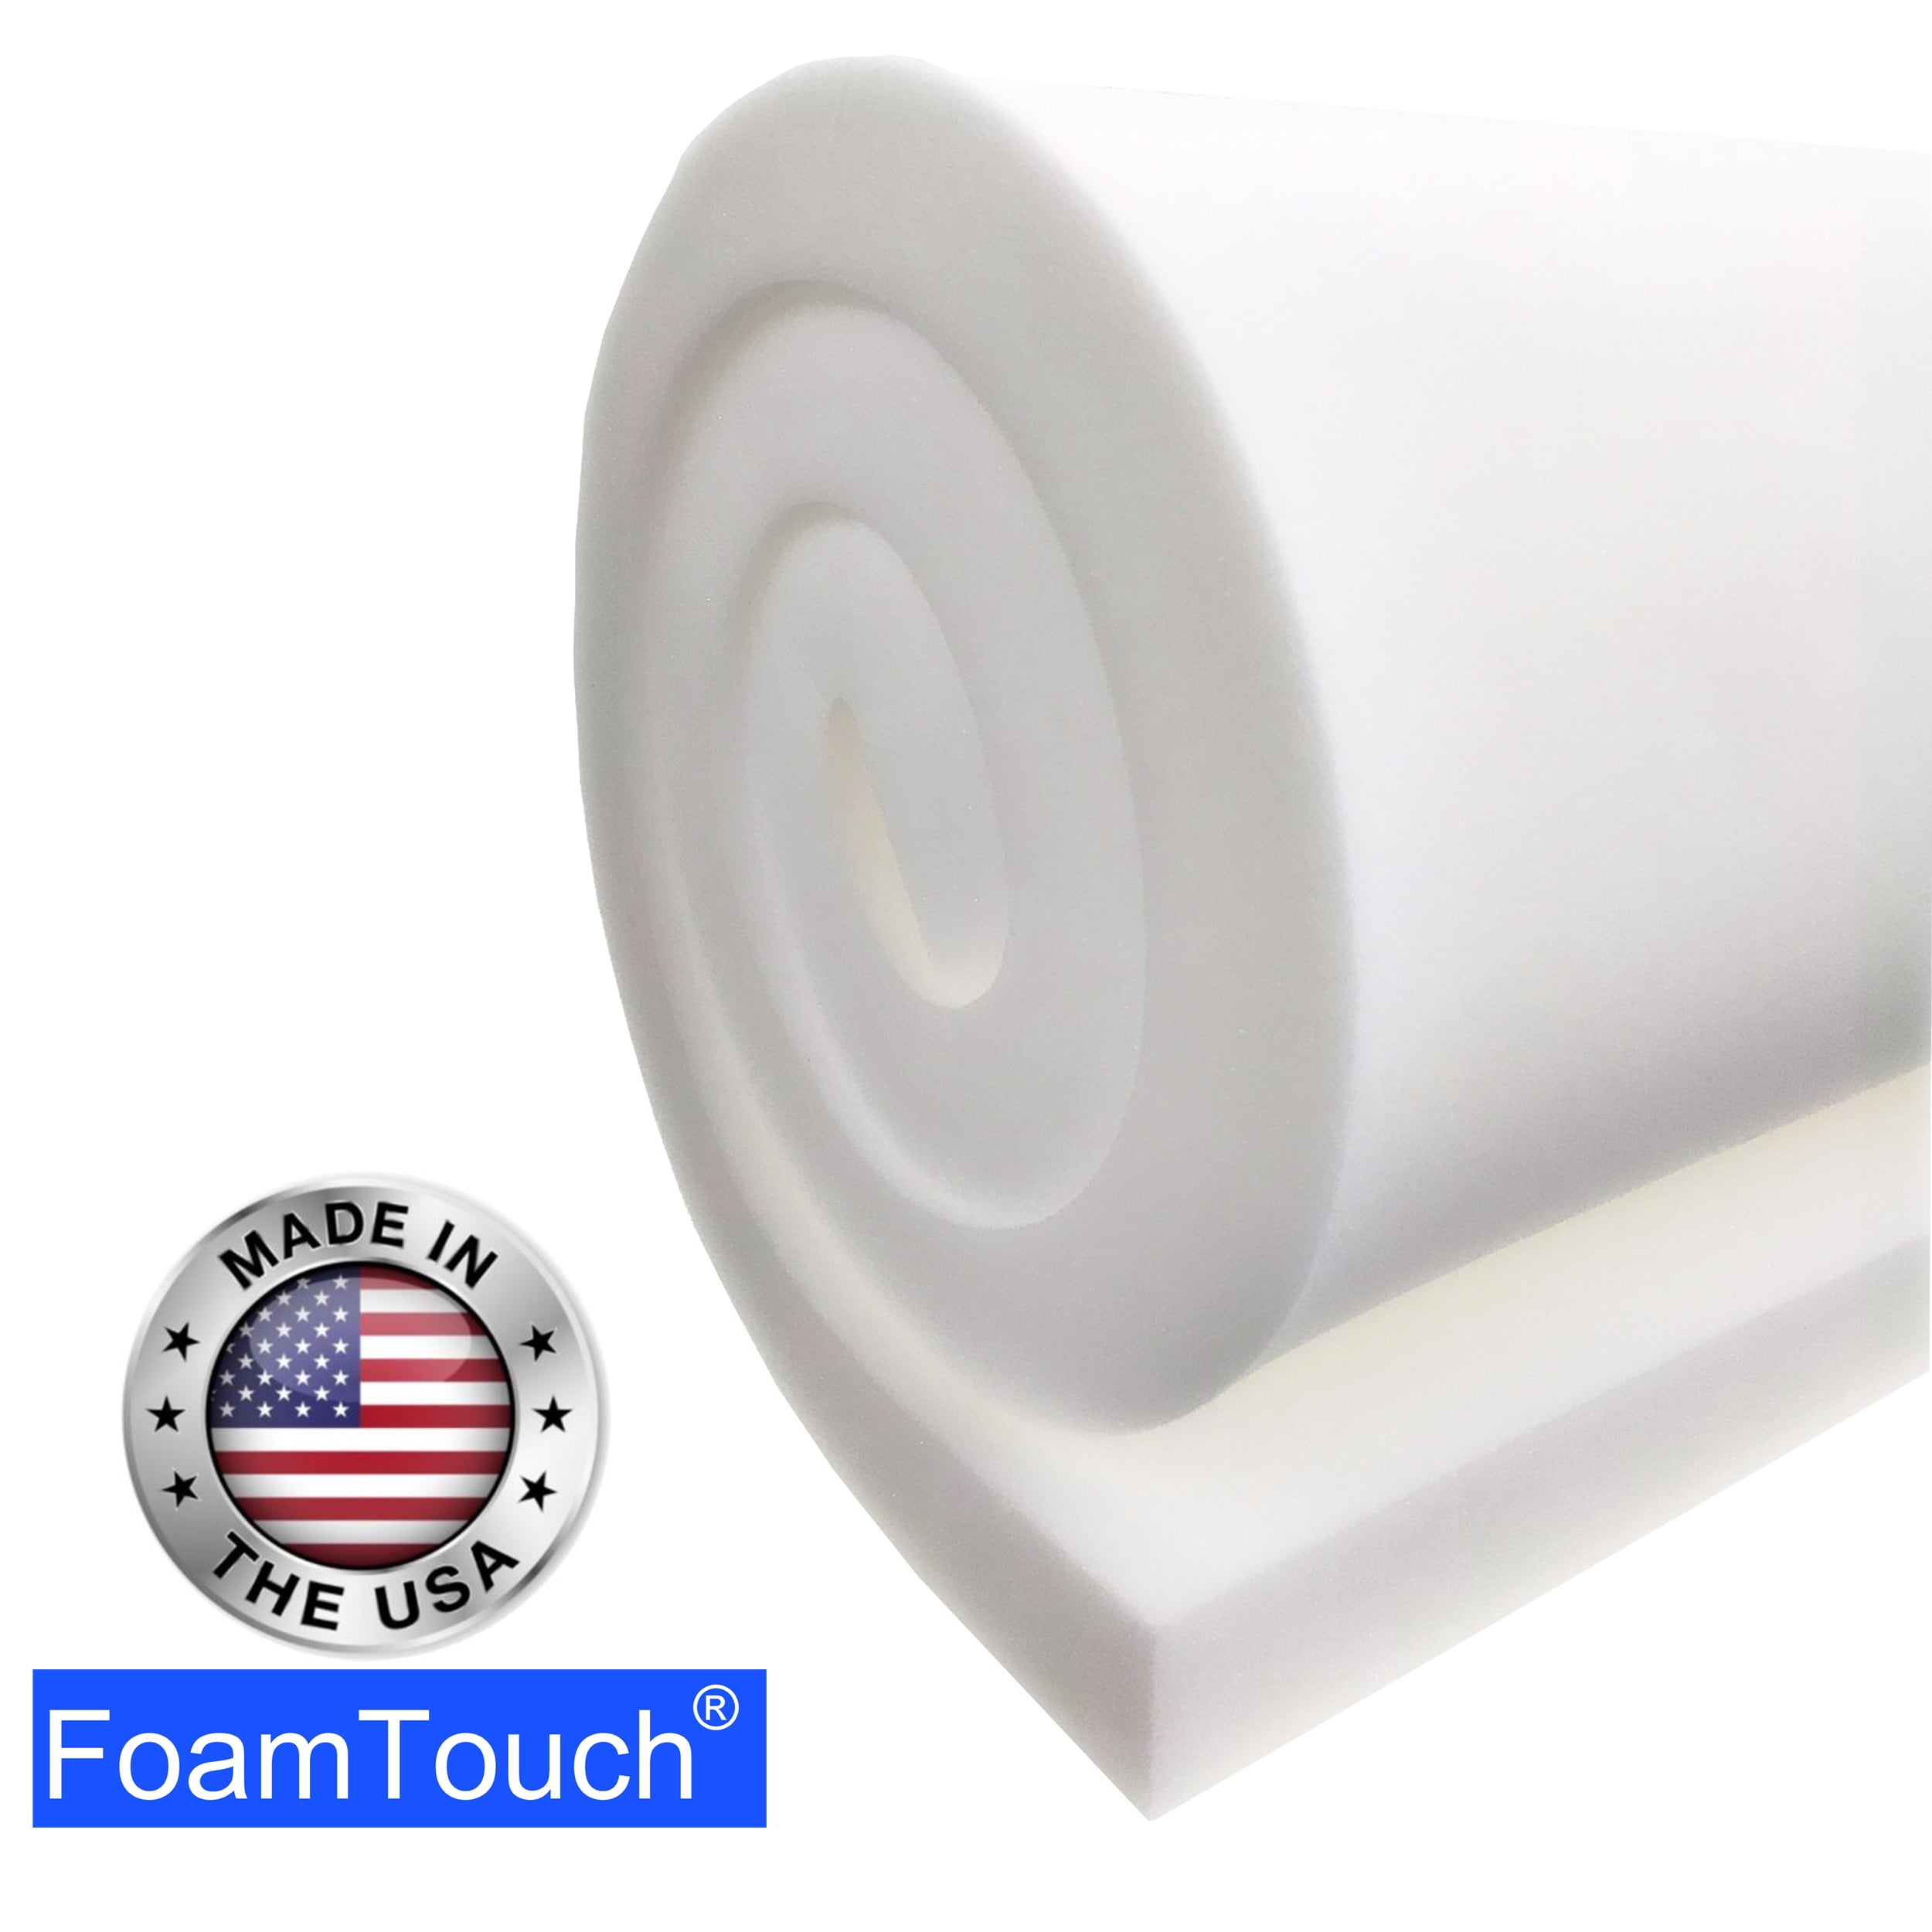 High Density Upholstery Foam Cushion 6x 24x 80 (Firm) 1.8 lb/per cubic  ft density with a 48lb ILD) Couch Cushion Replacement, Foam Padding (White)